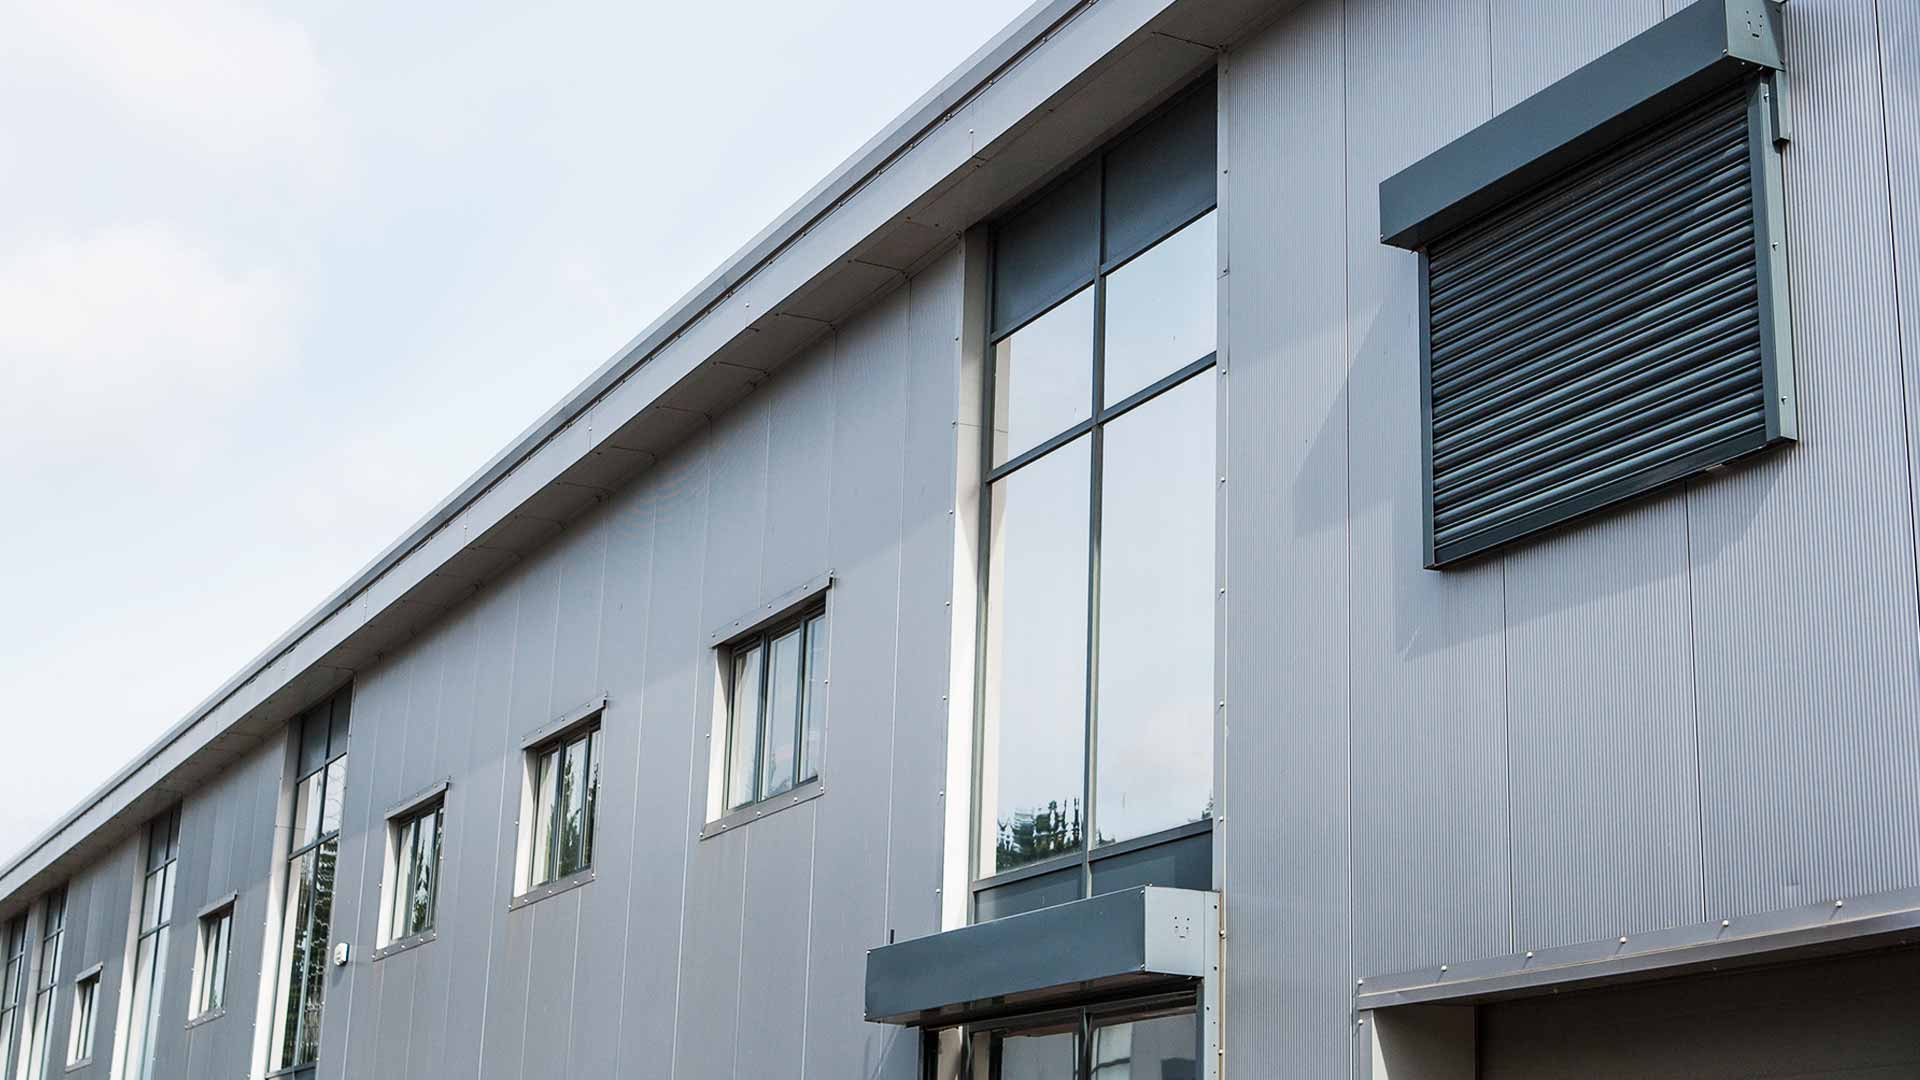 Detail of steel cladding on steel frame business units in Faversham.